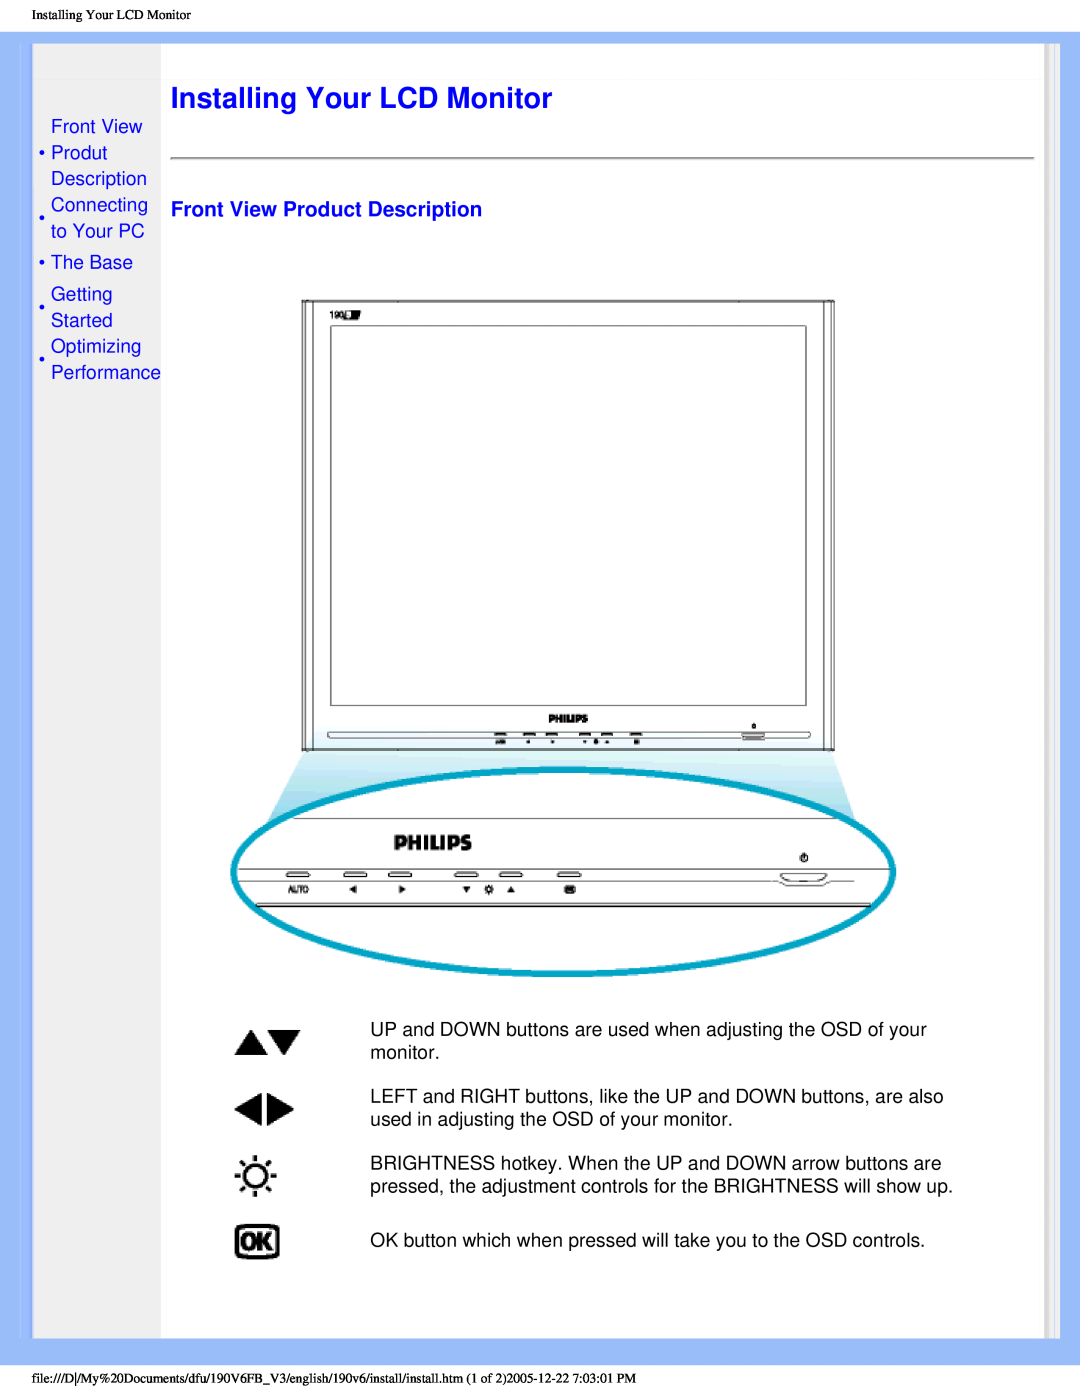 Philips 190V6FB user manual Installing Your LCD Monitor, Front View Product Description 